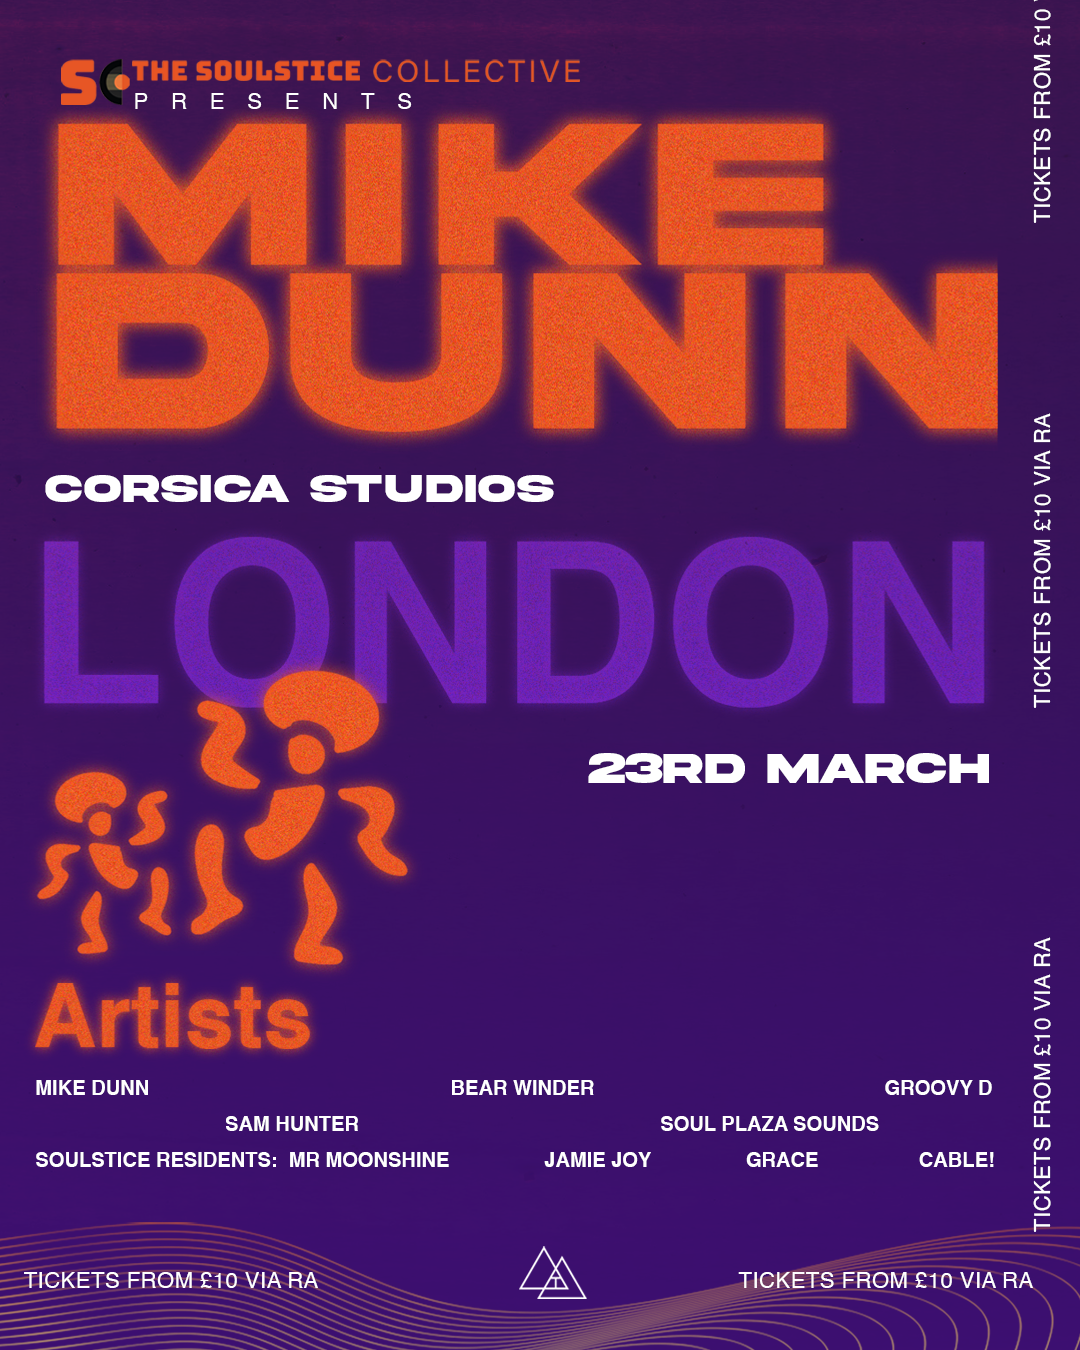 The Soulstice Collective presents: Mike Dunn - Página frontal